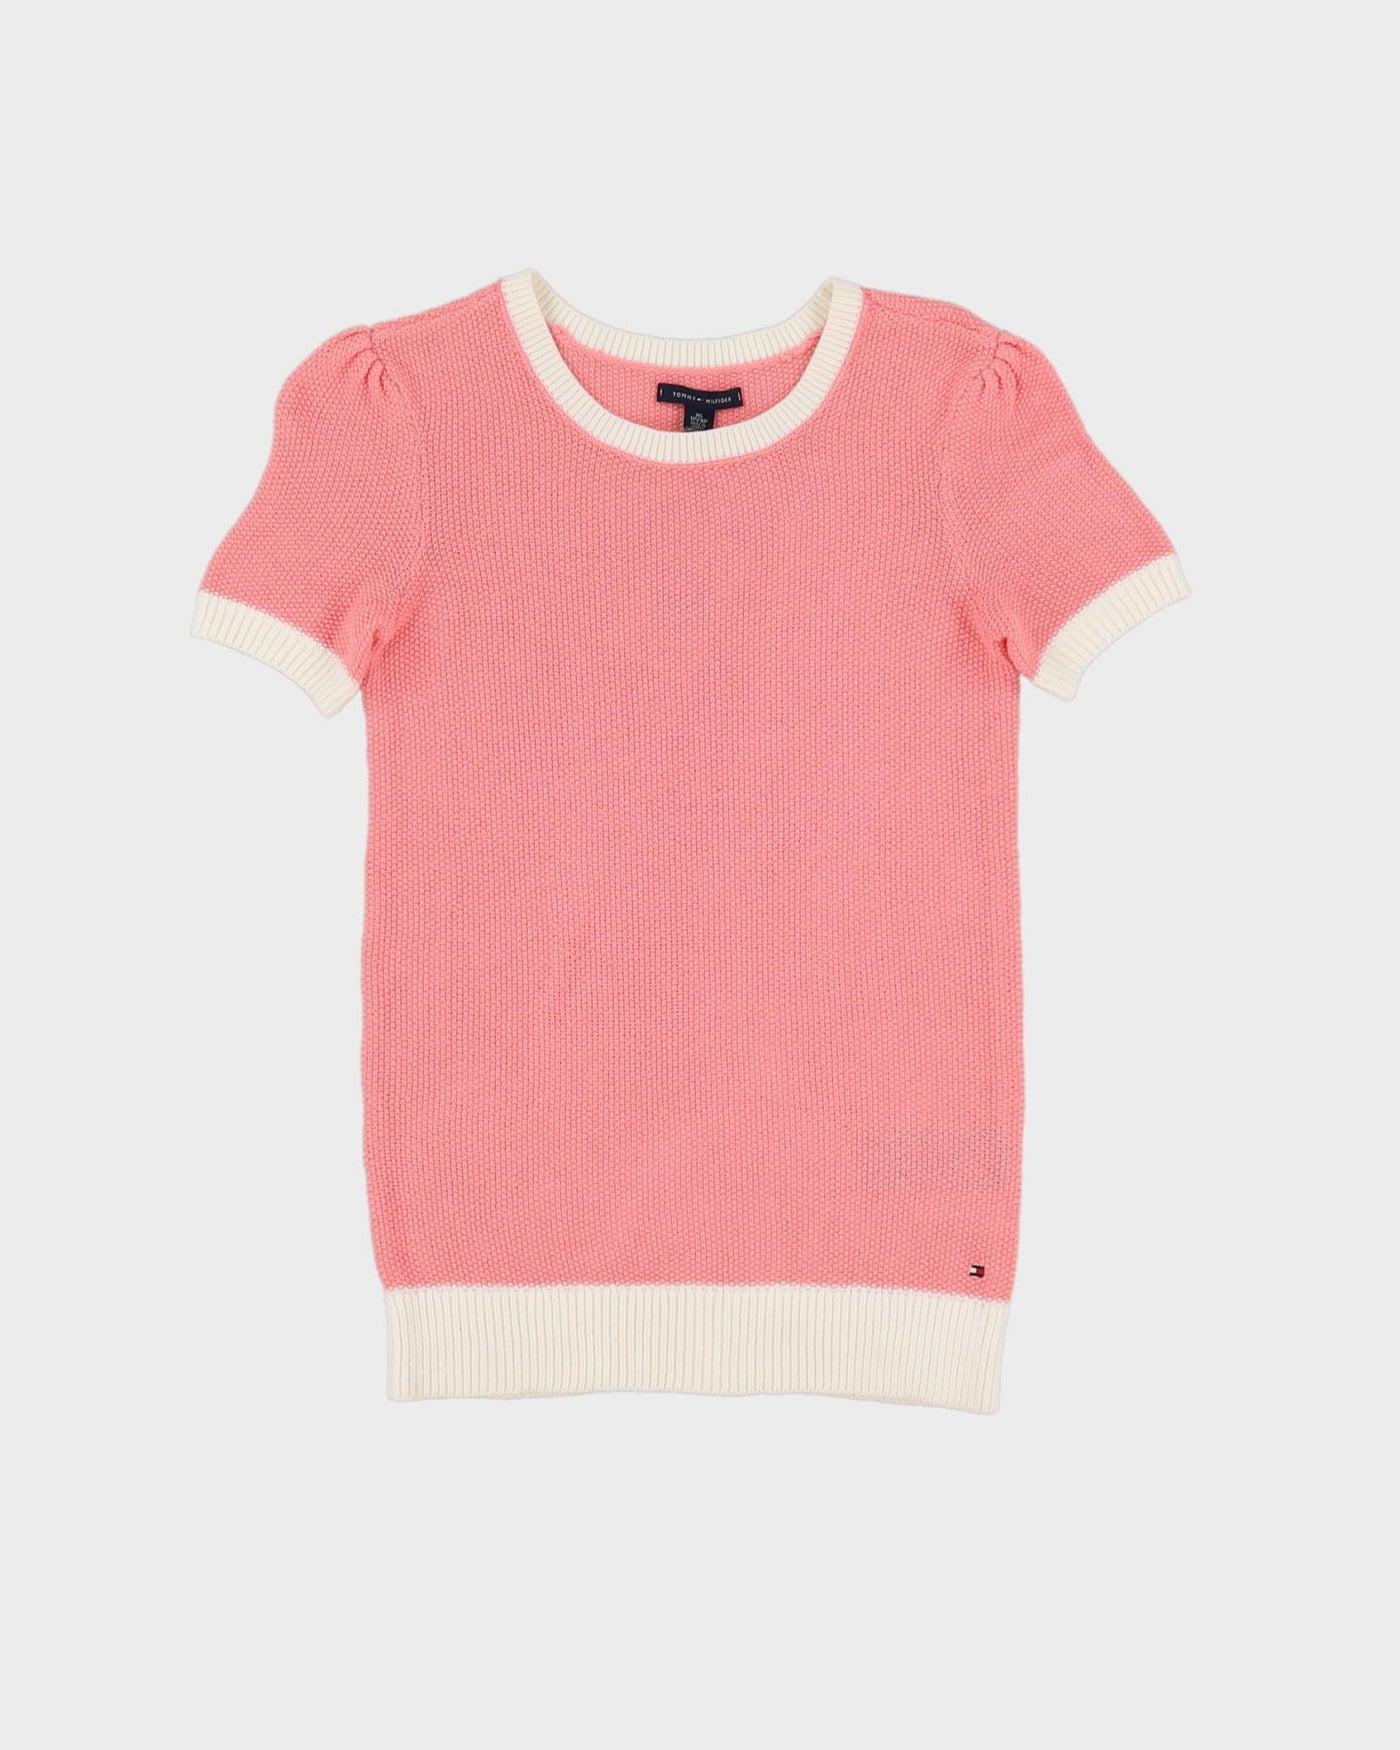 Tommy Hilfiger Pink Knitted Short Sleeve Top - XS